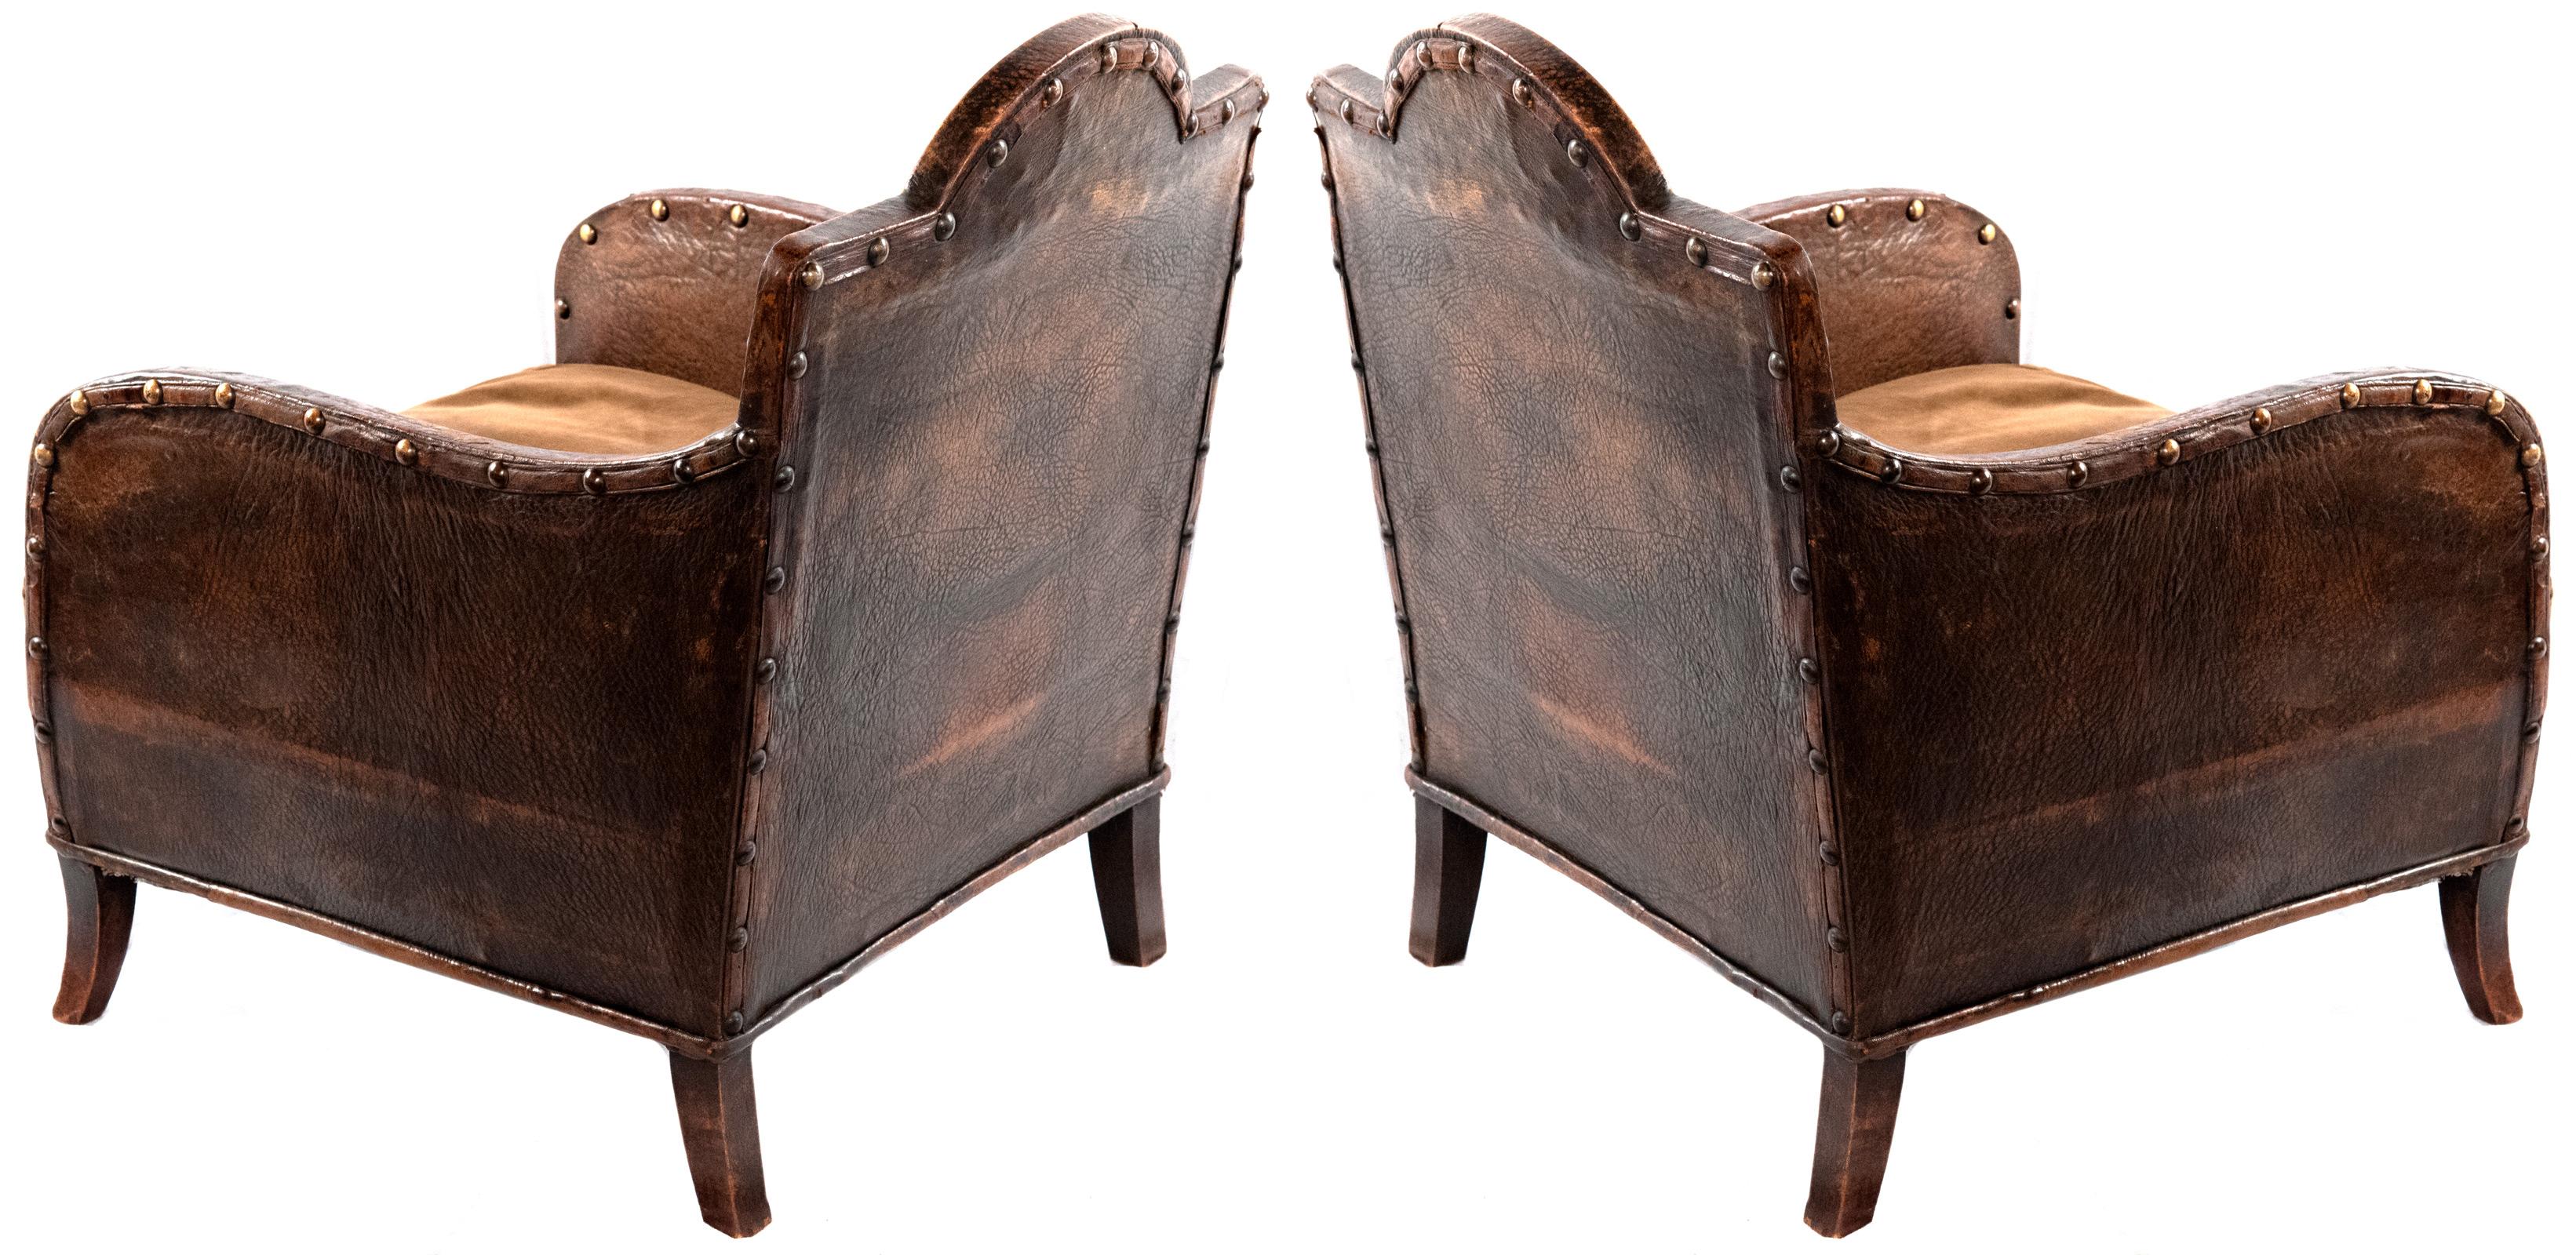 Two walrus leather chair with brass studs and sabered walnut legs.